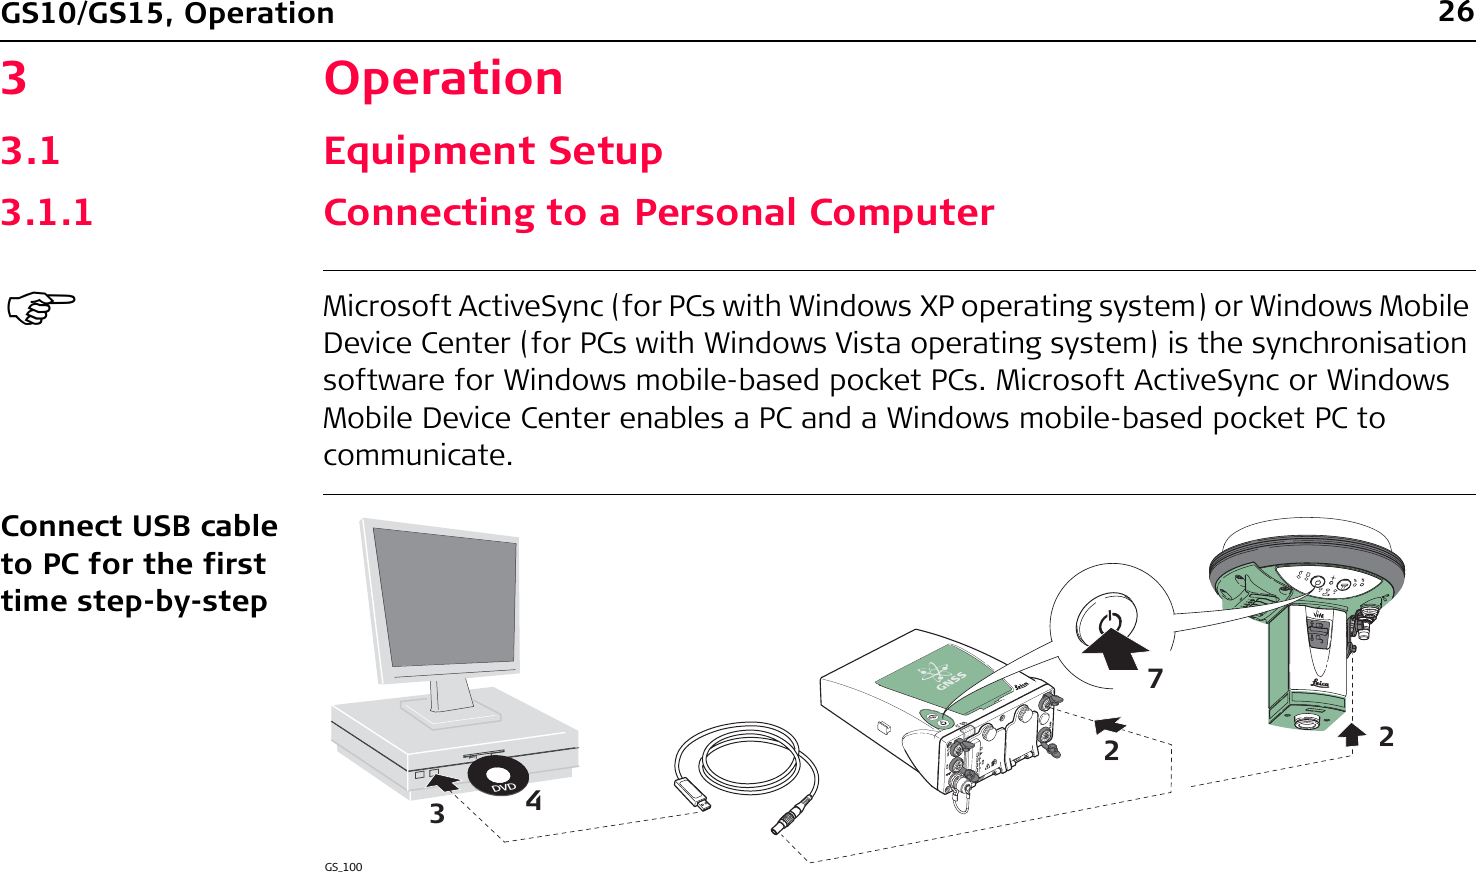 26GS10/GS15, Operation3 Operation3.1 Equipment Setup3.1.1 Connecting to a Personal Computer)Microsoft ActiveSync (for PCs with Windows XP operating system) or Windows Mobile Device Center (for PCs with Windows Vista operating system) is the synchronisation software for Windows mobile-based pocket PCs. Microsoft ActiveSync or Windows Mobile Device Center enables a PC and a Windows mobile-based pocket PC to communicate.Connect USB cable to PC for the first time step-by-stepGS_100DVD42273